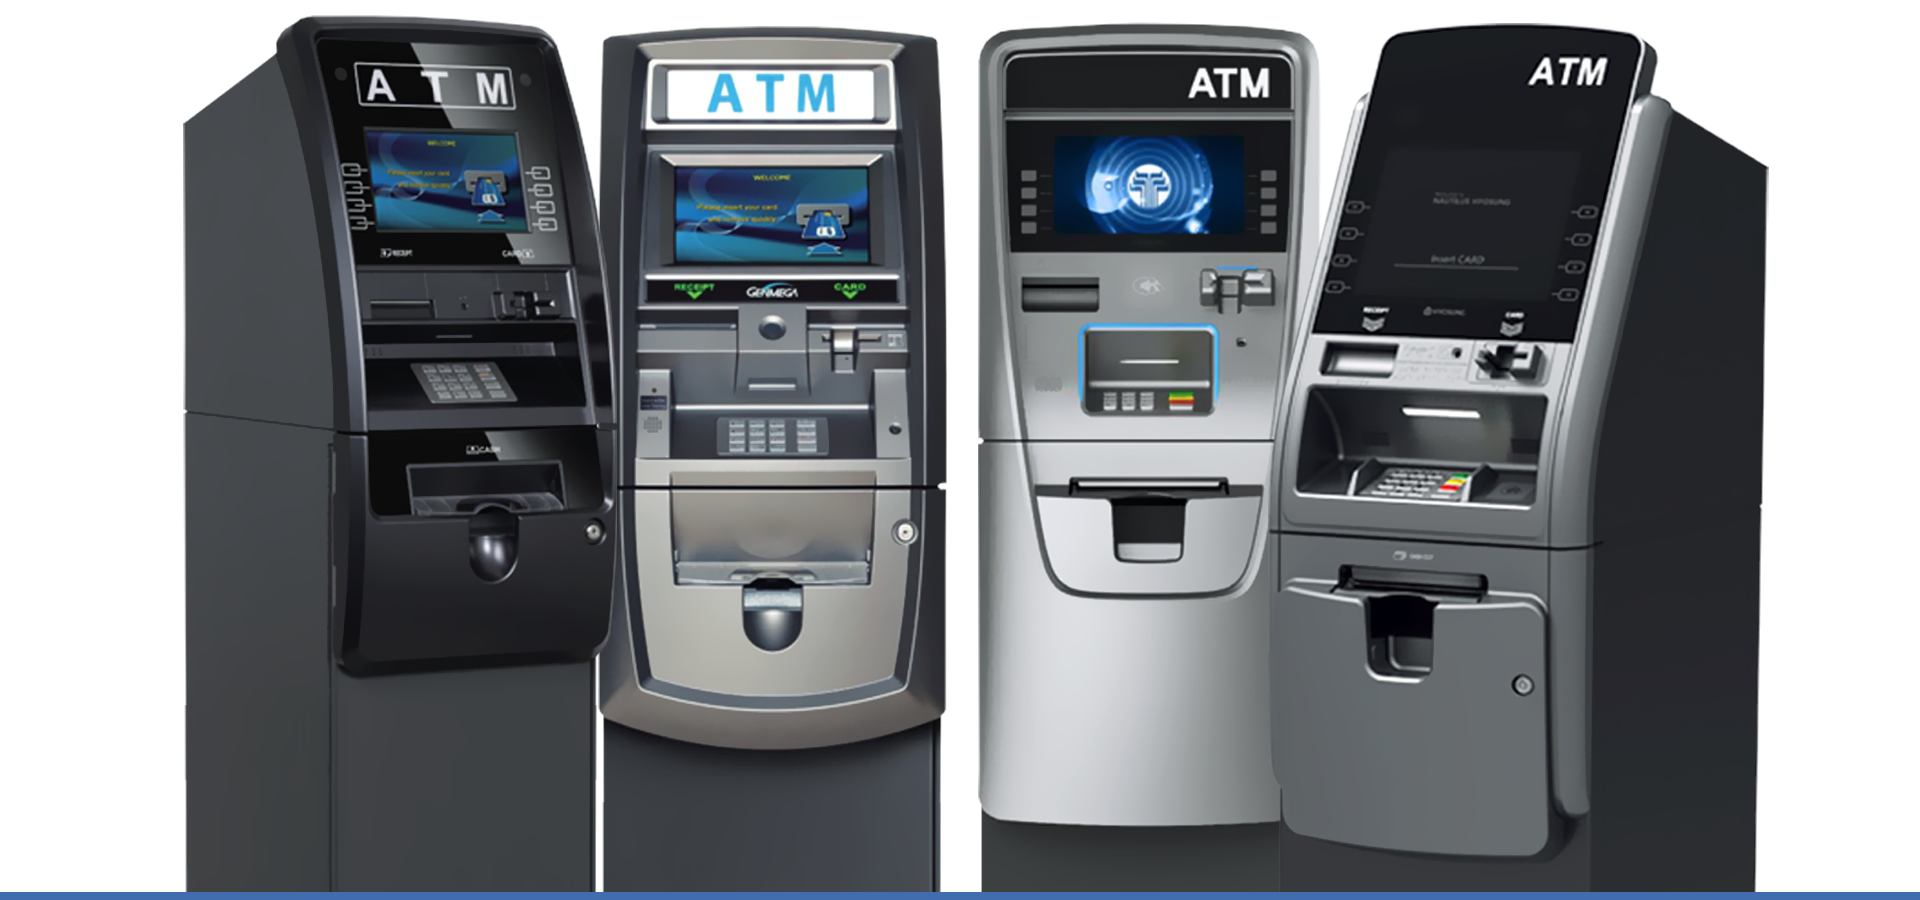 Eglobal Buy Atms And Atm Supplies Through Our Sister Company